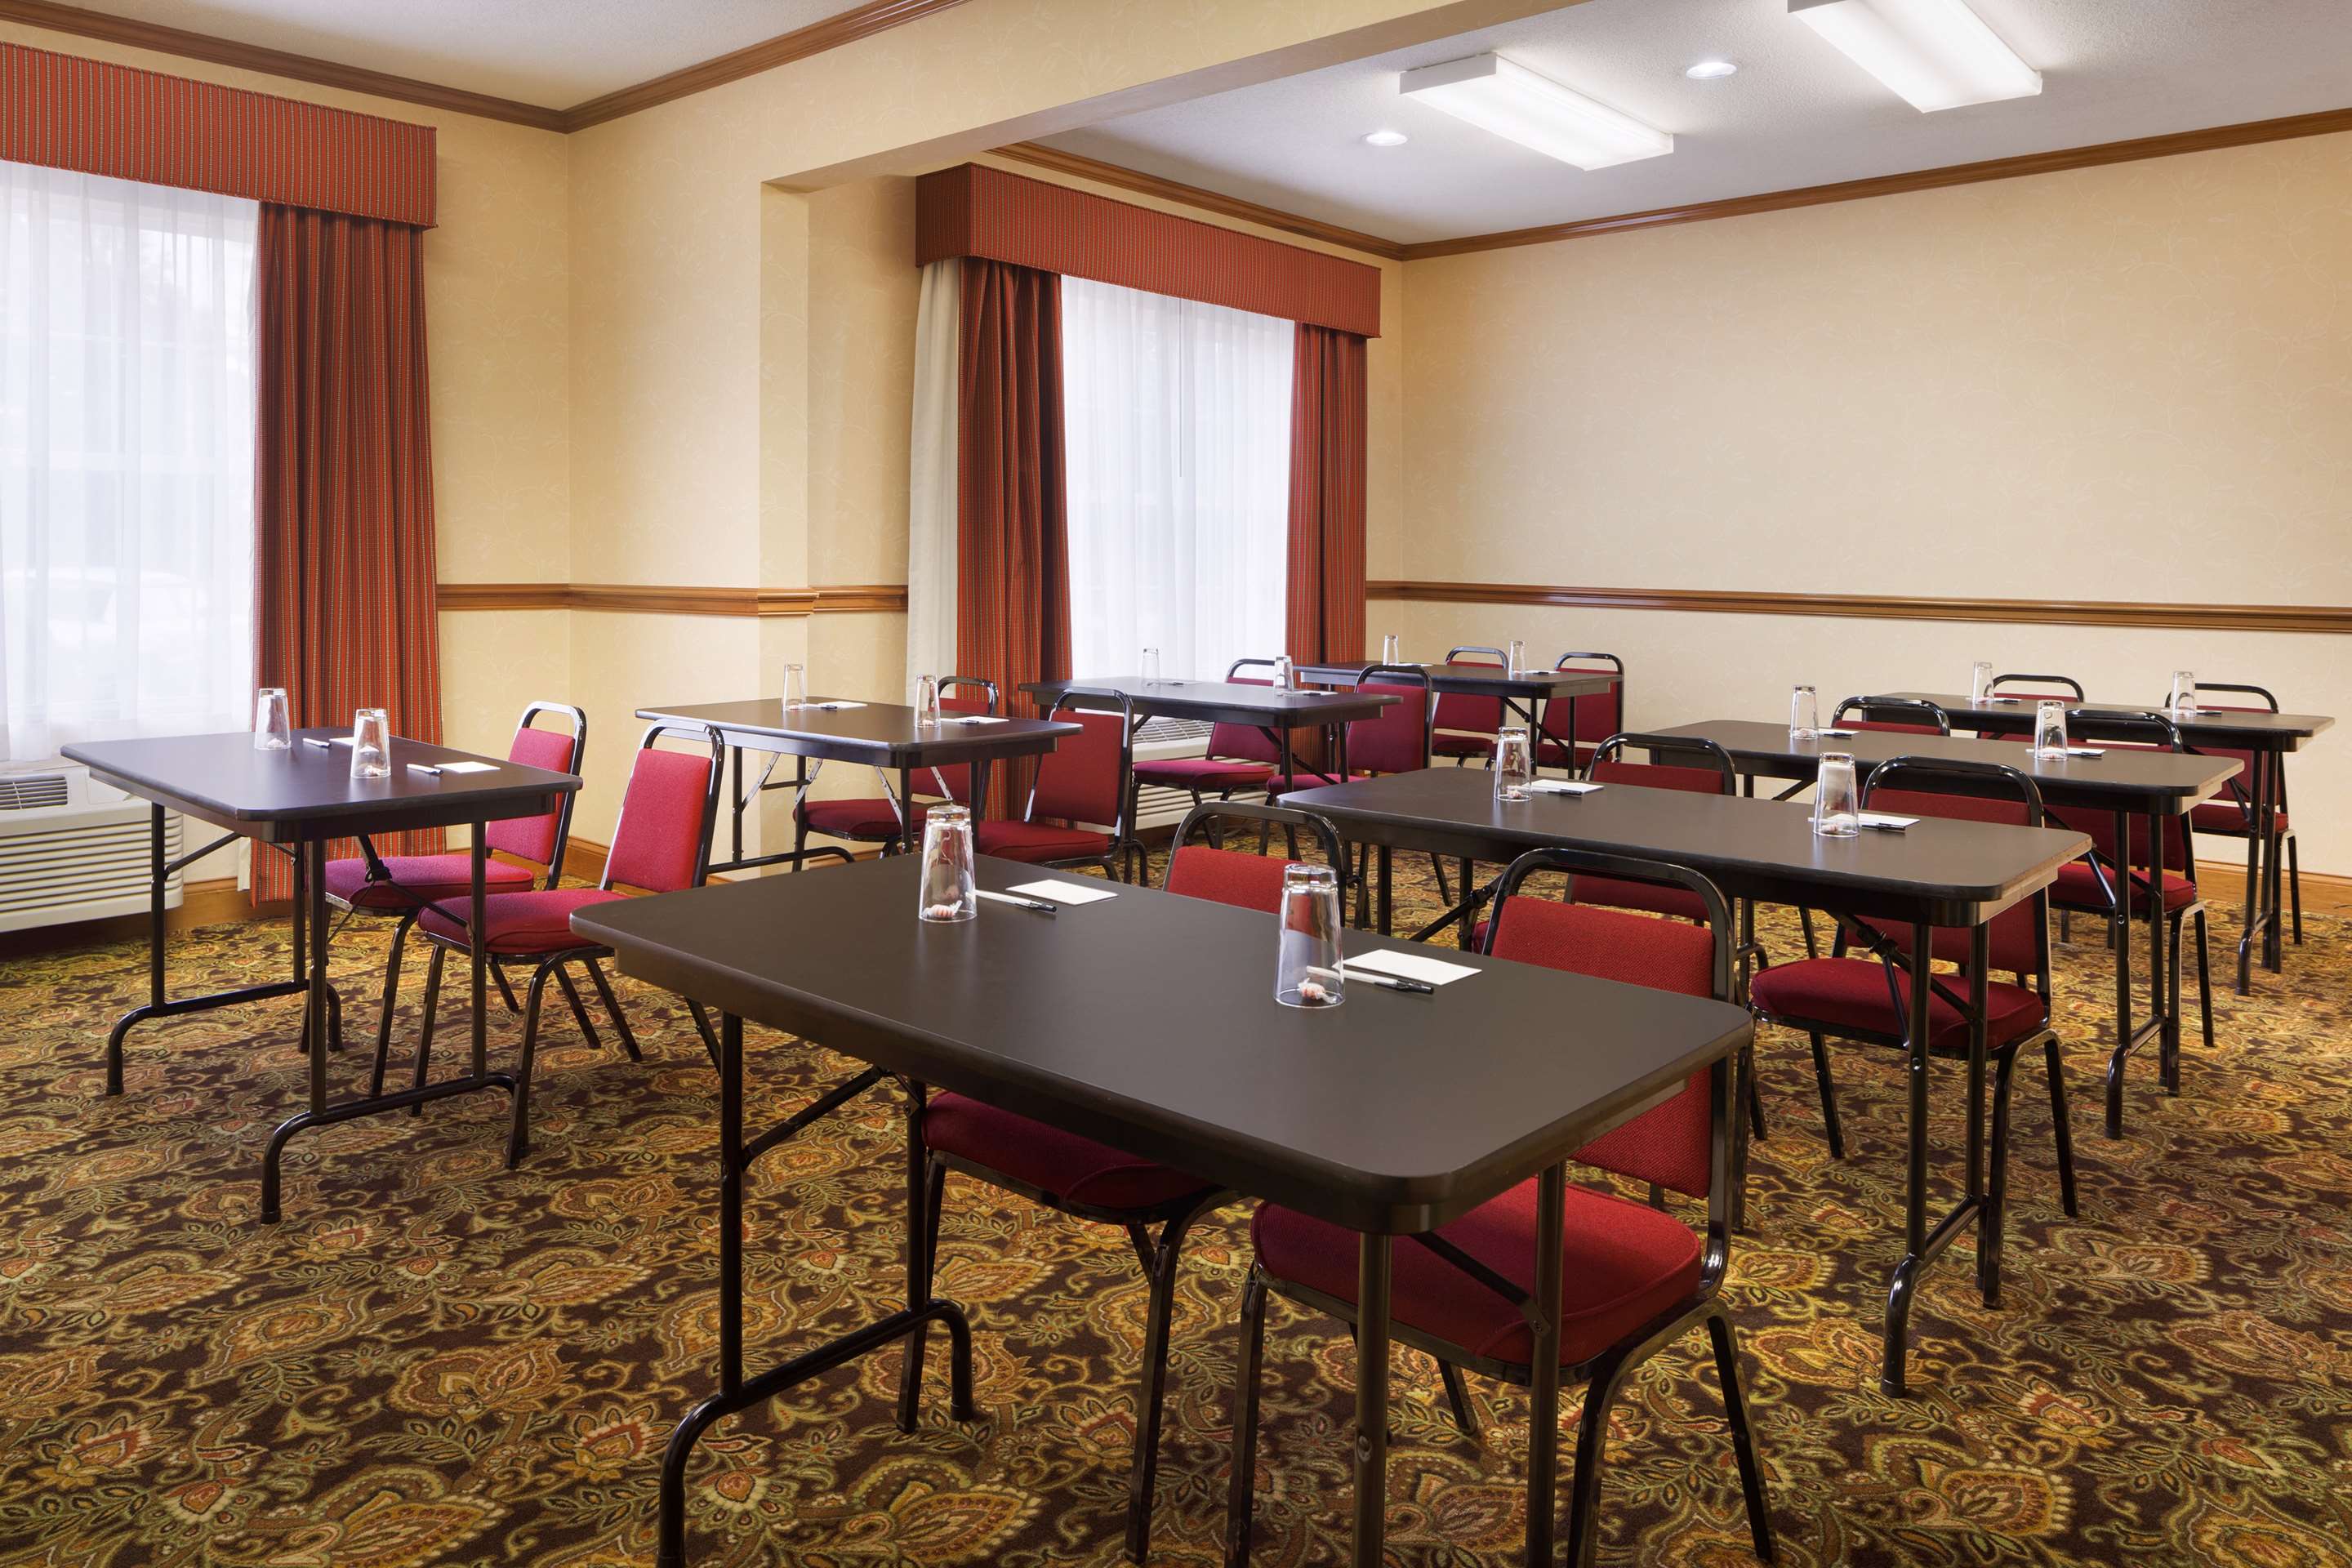 Country Inn & Suites by Radisson, Macedonia, Oh